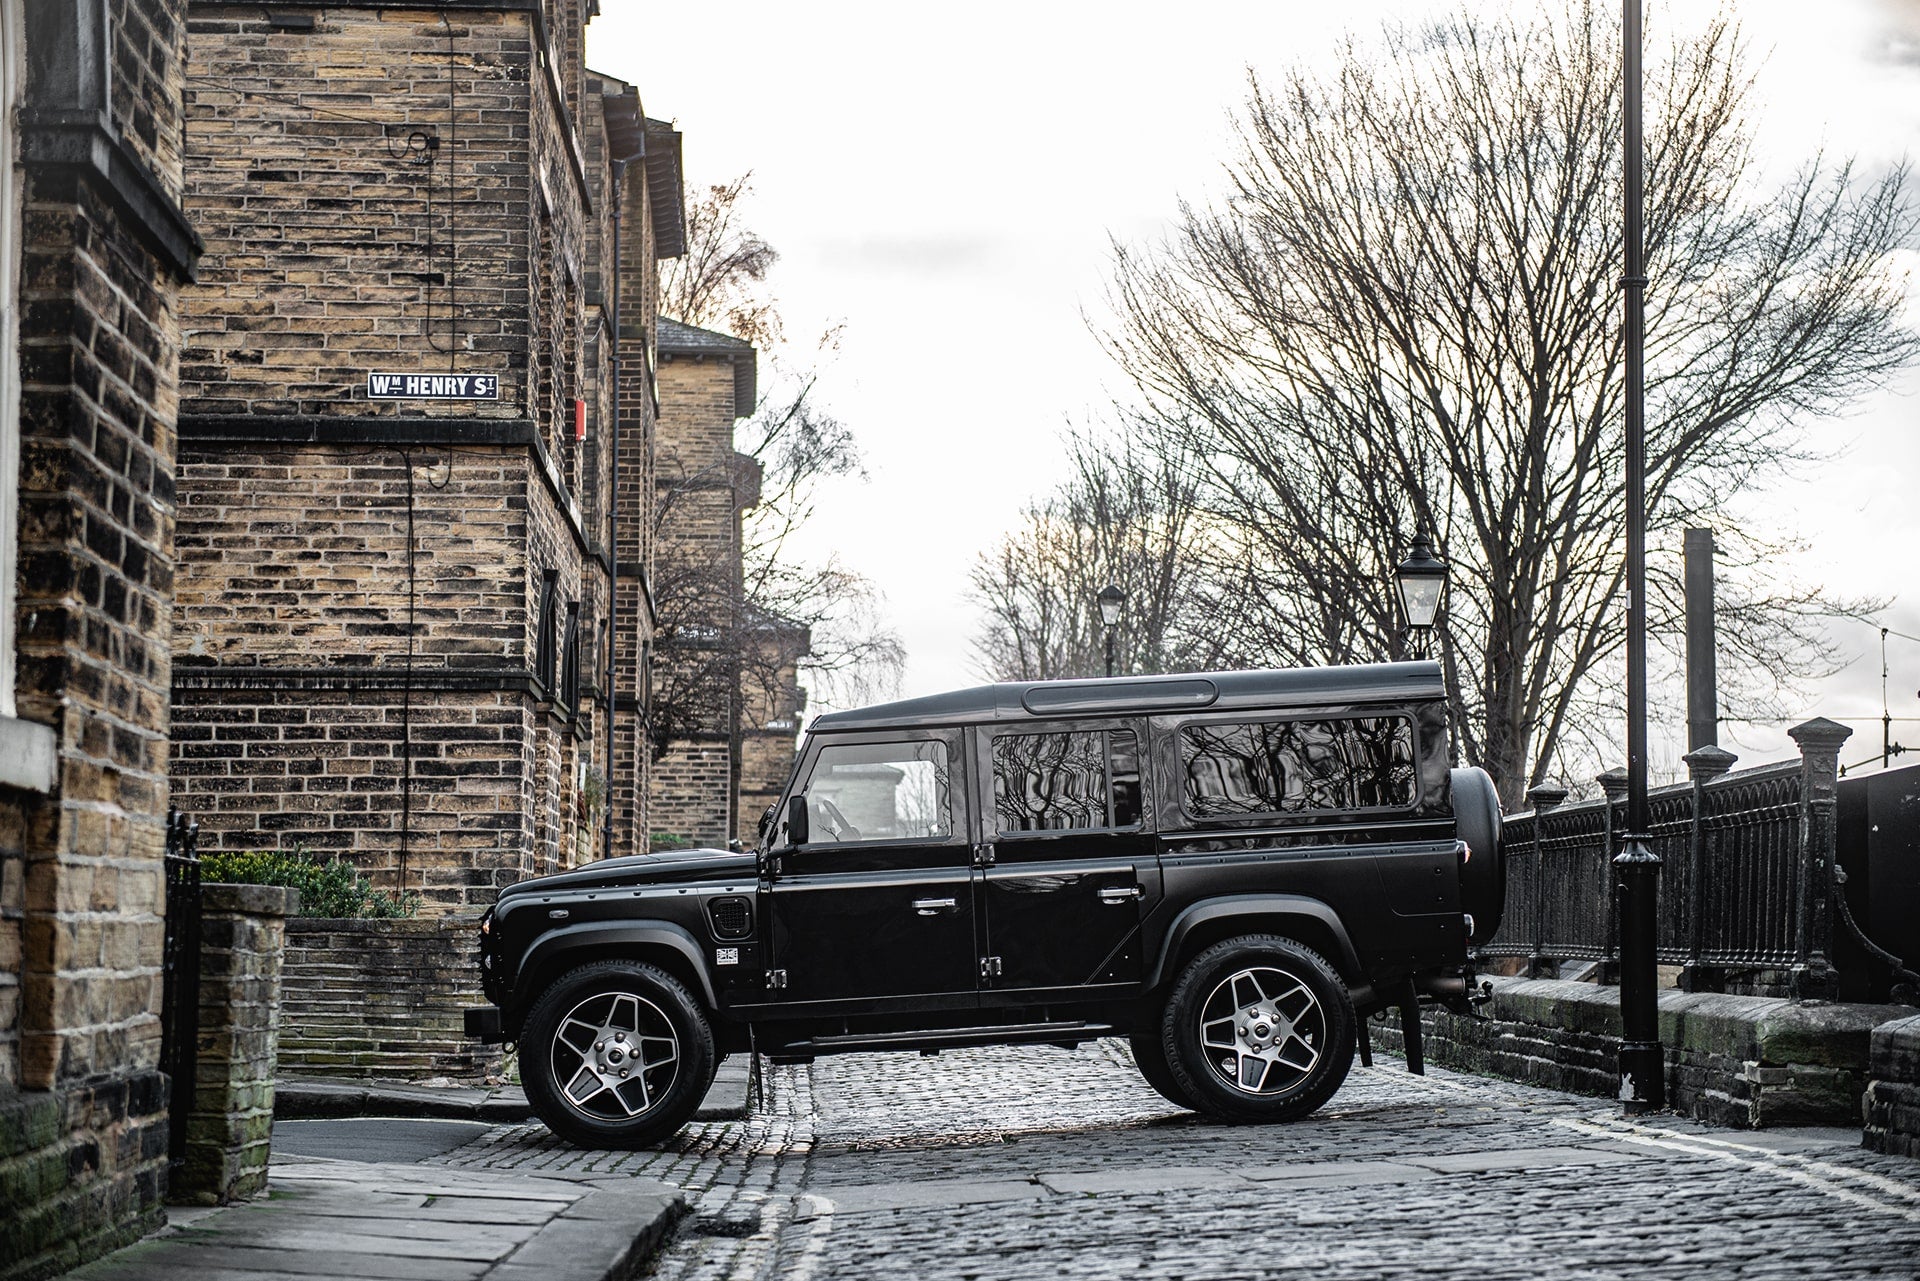 Classic Land Rover Defender 110 Wide Track Conversion - Project Kahn